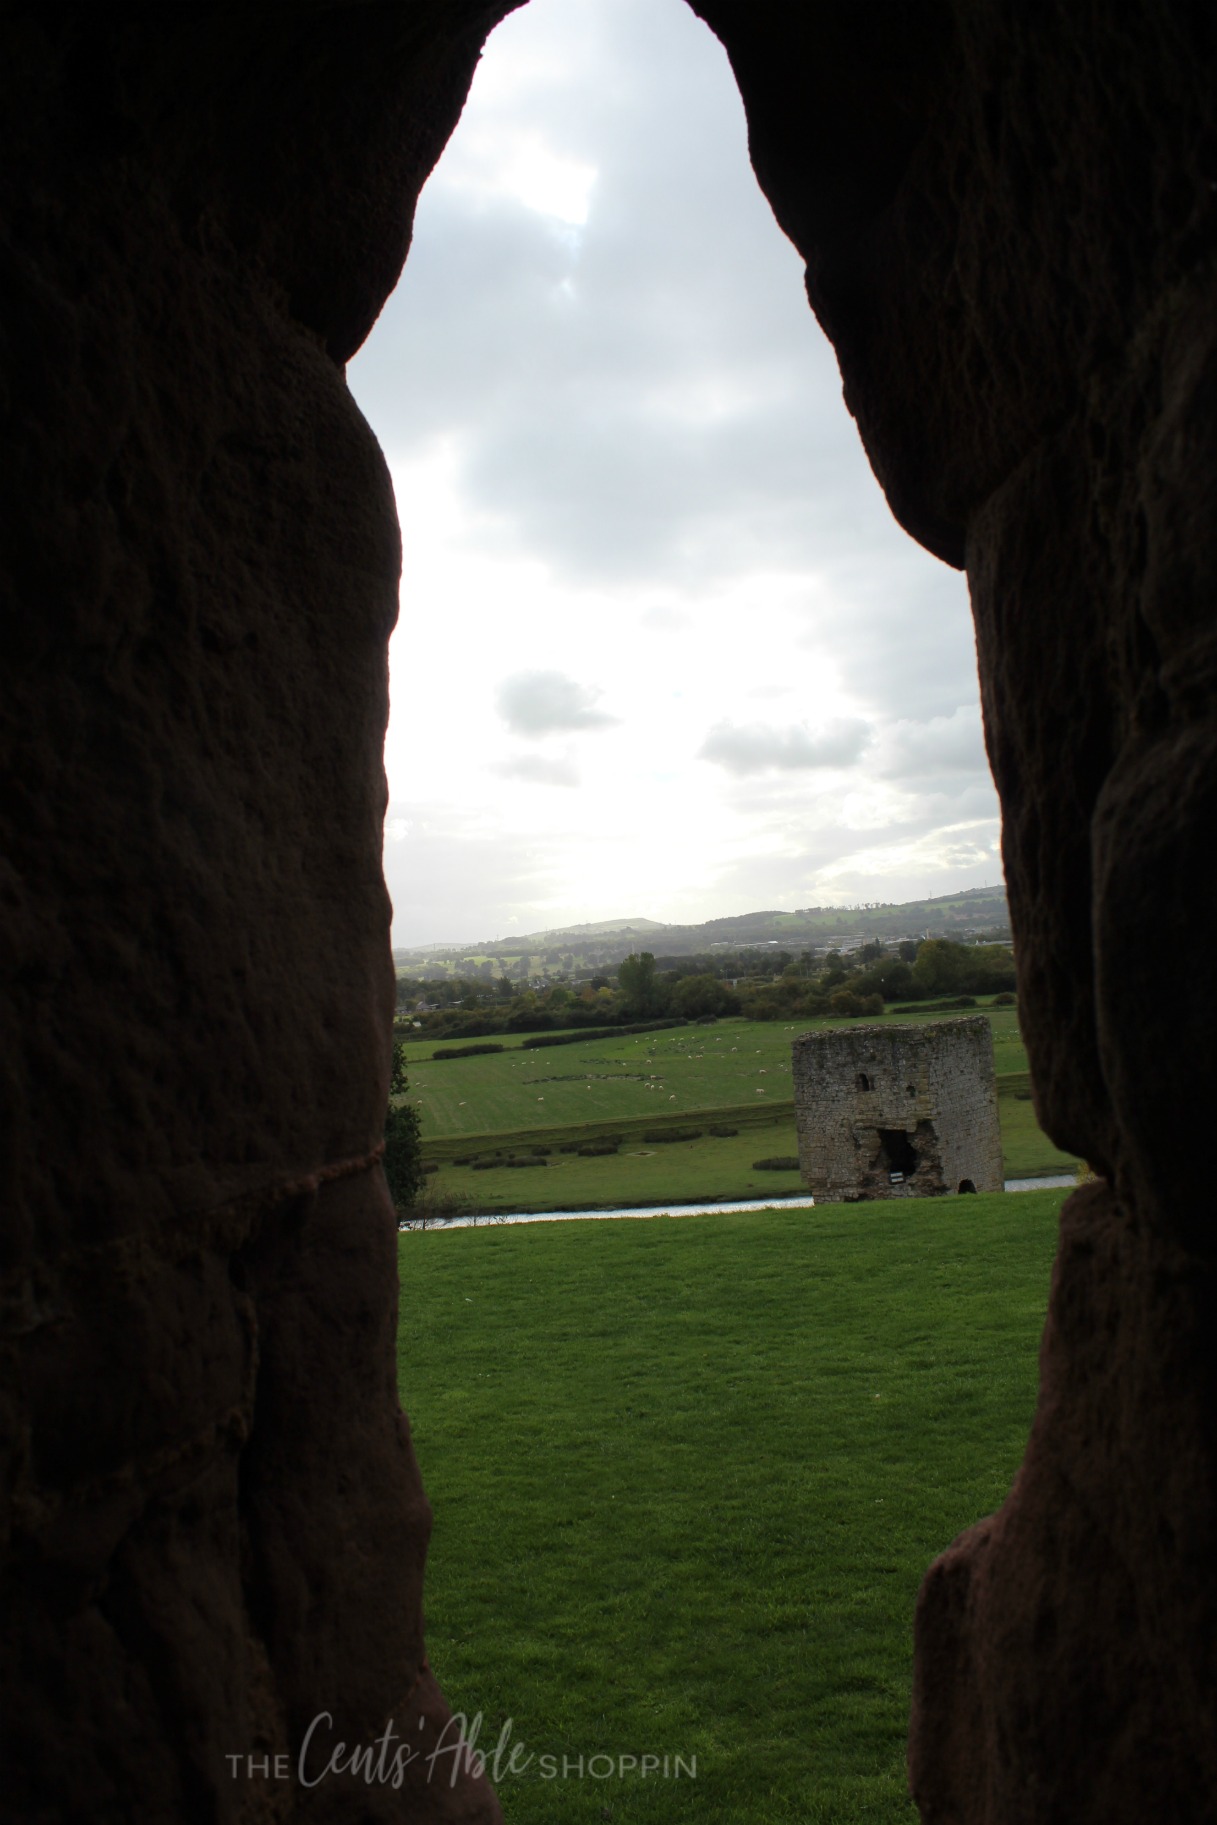 View from Castle Tower \\ Rhuddlan Castle is a castle located in Rhuddlan, Denbighshire, Wales. It was one of a series of castles erected by King Edward I in 1277.